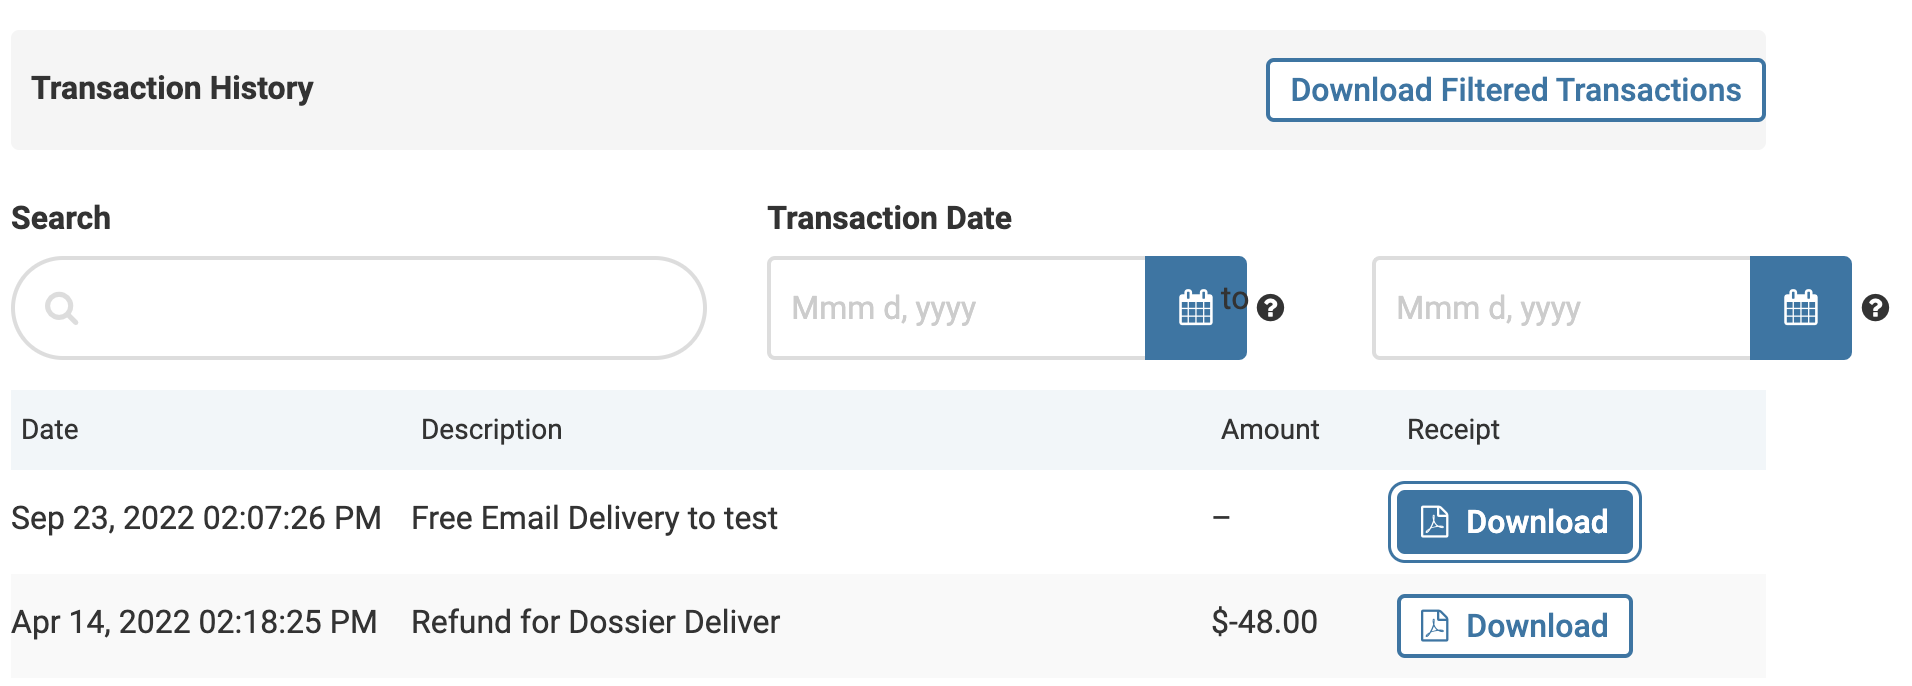 Transaction History section with Download selected under the Receipt column